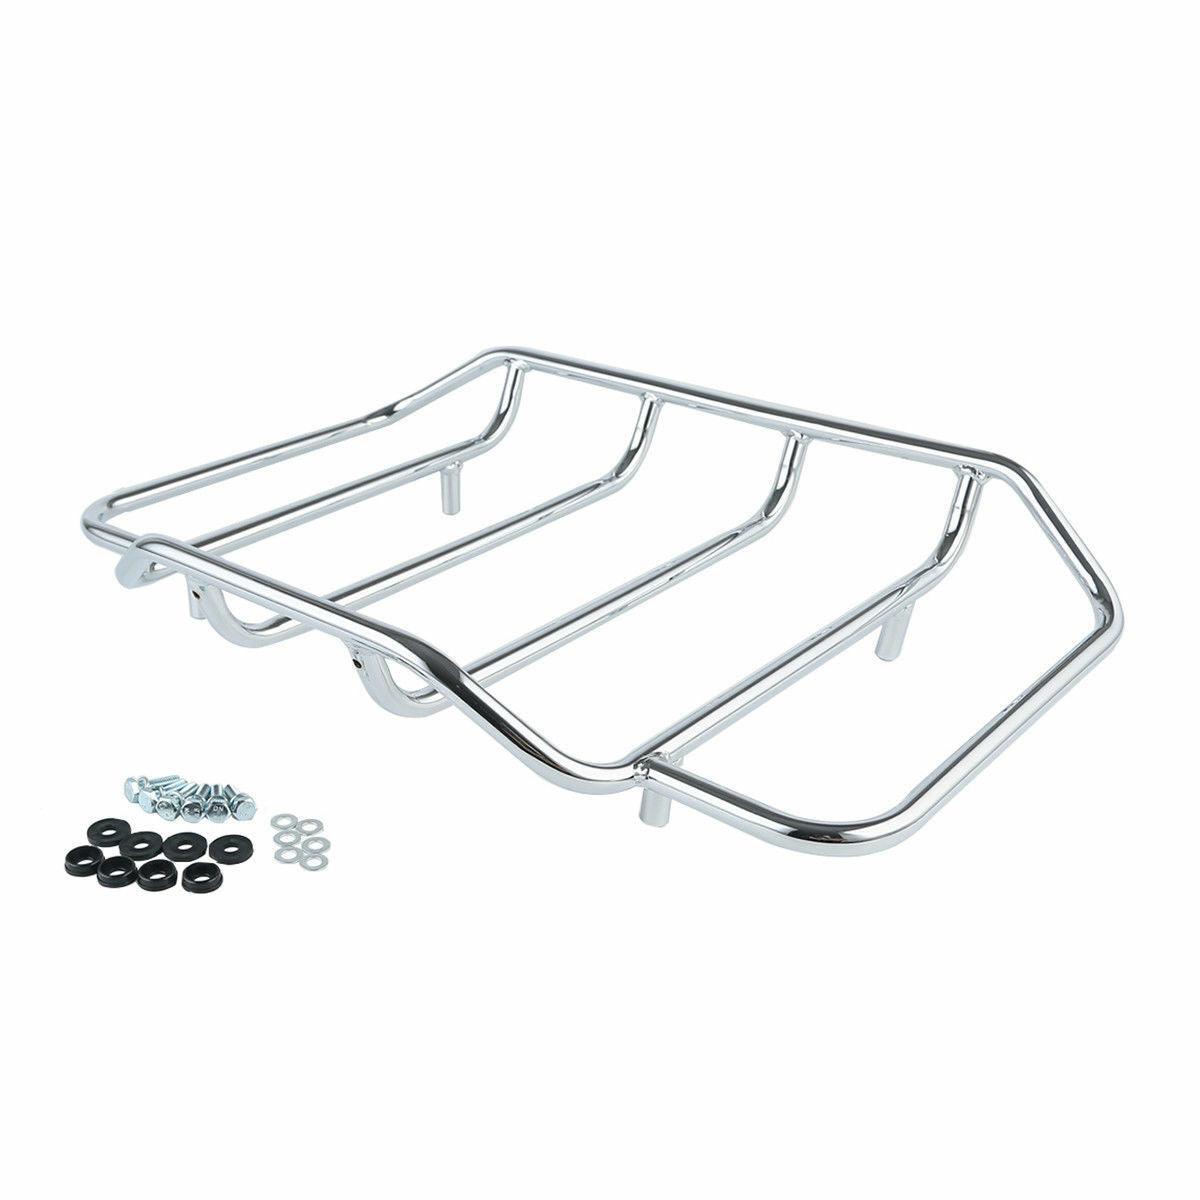 King Pack Trunk Black Mount Rack Fit For Harley Tour Pak Touring Road King 97-08 - Moto Life Products